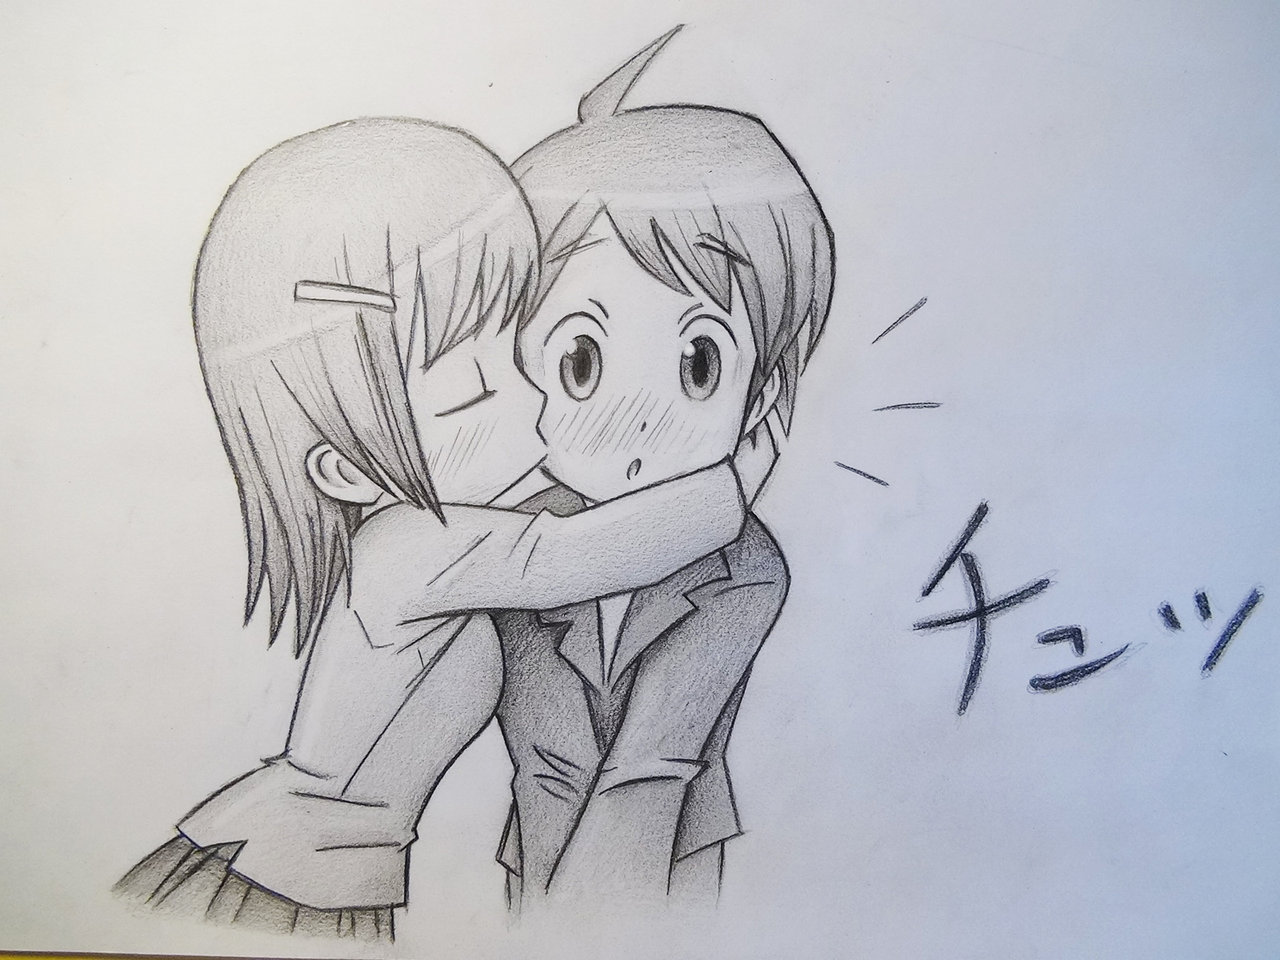 Anime Boy And Girl In Love Sketches